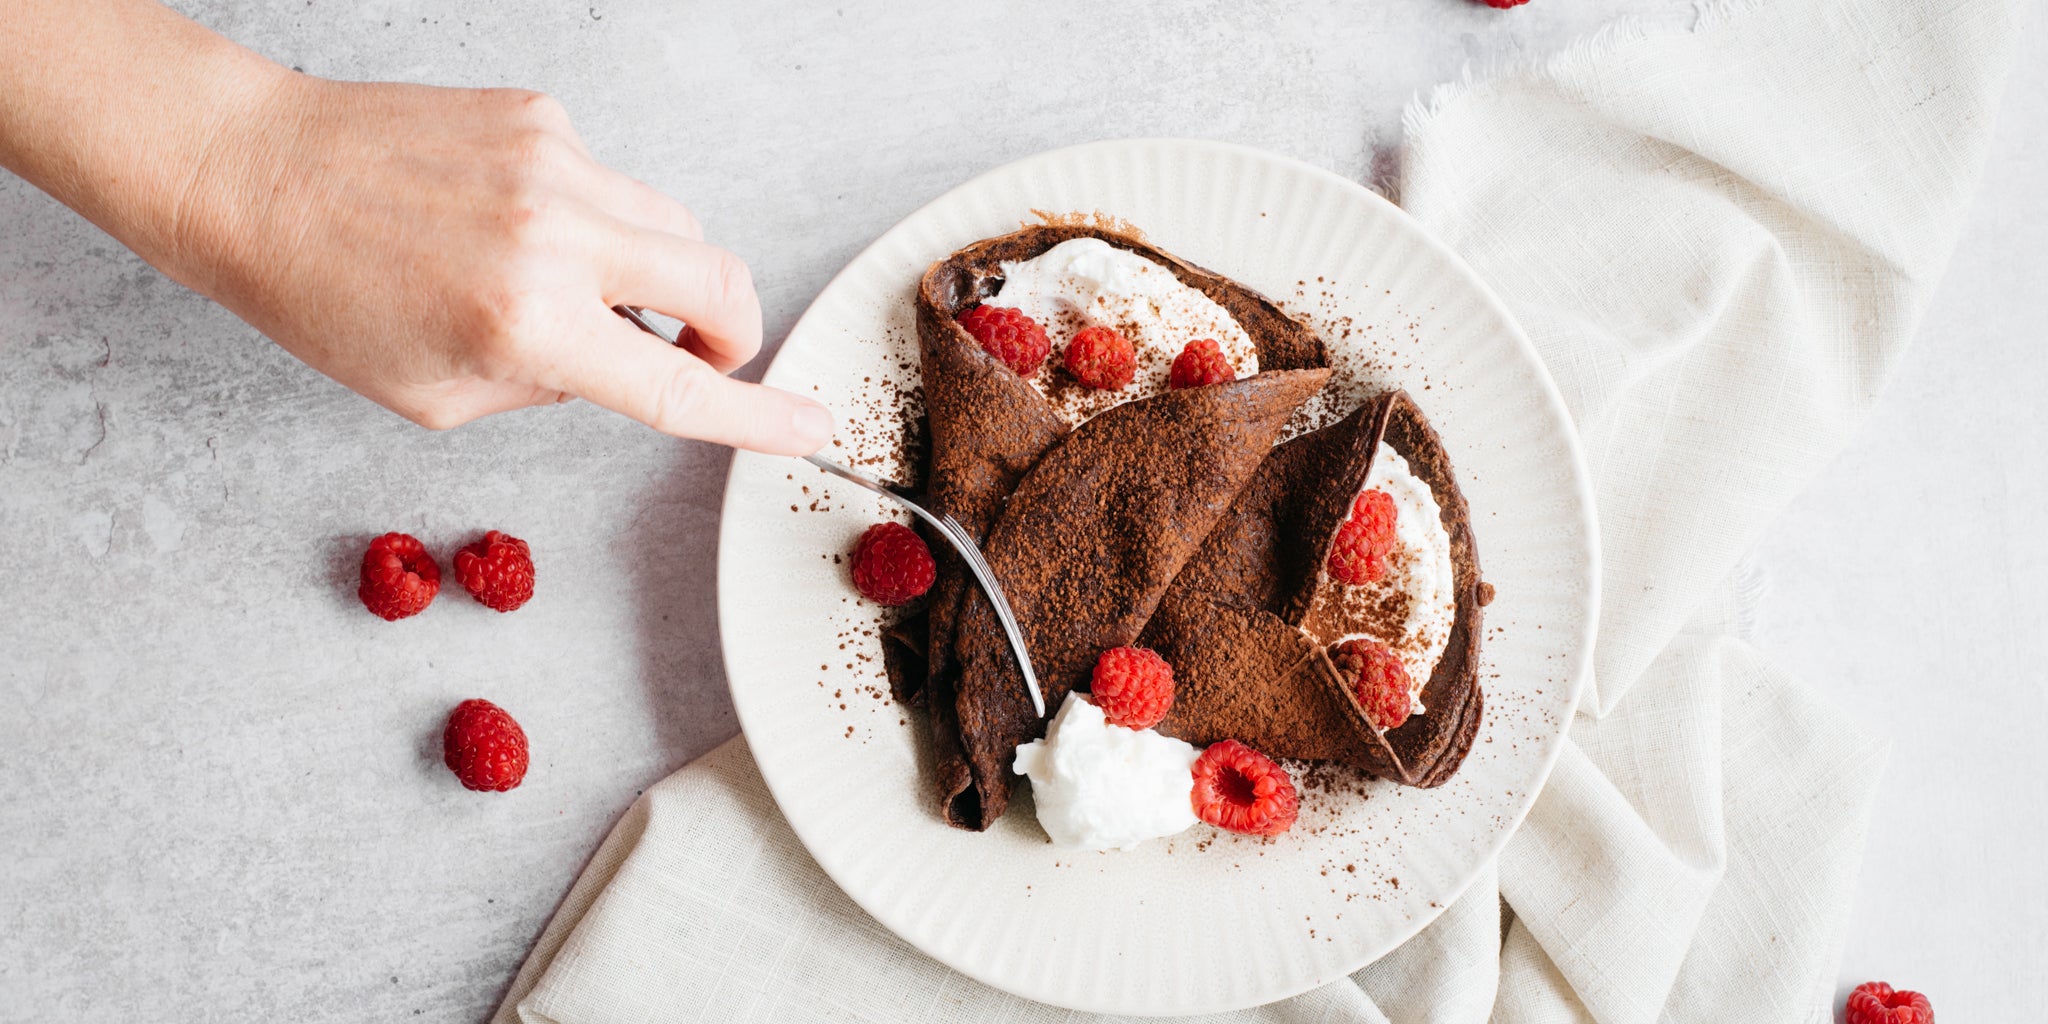 White plate with two chocolate crepes and raspberries. Hand reaching in with a fork